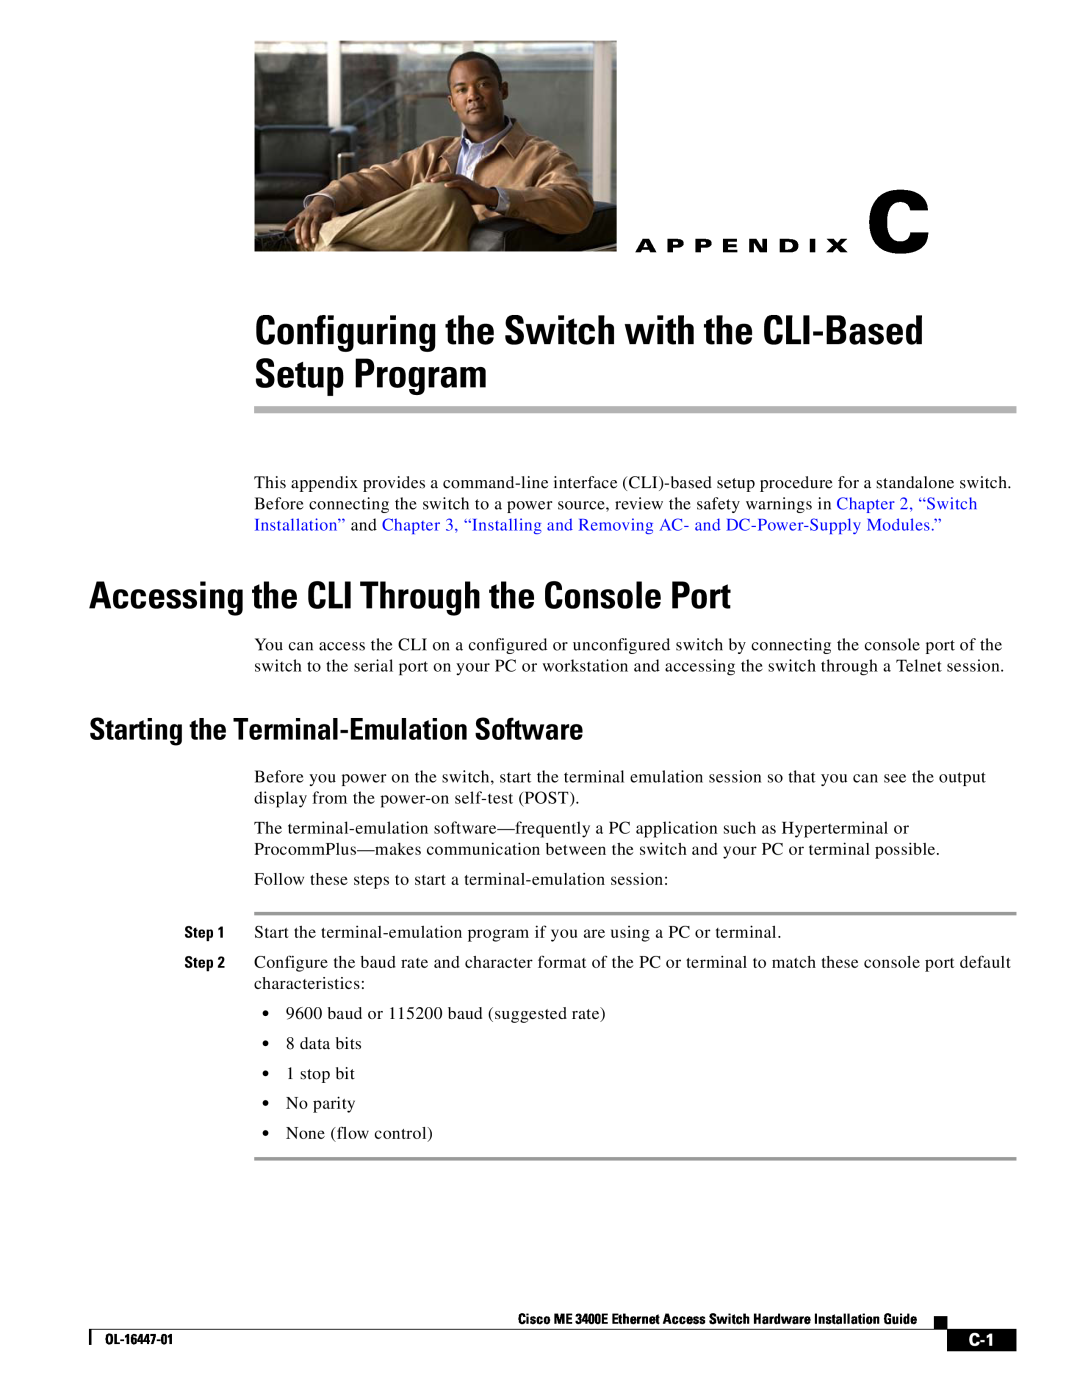 Cisco Systems OL-16447-01 manual Configuring the Switch with the CLI-Based Setup Program, A P P E N D I X C 